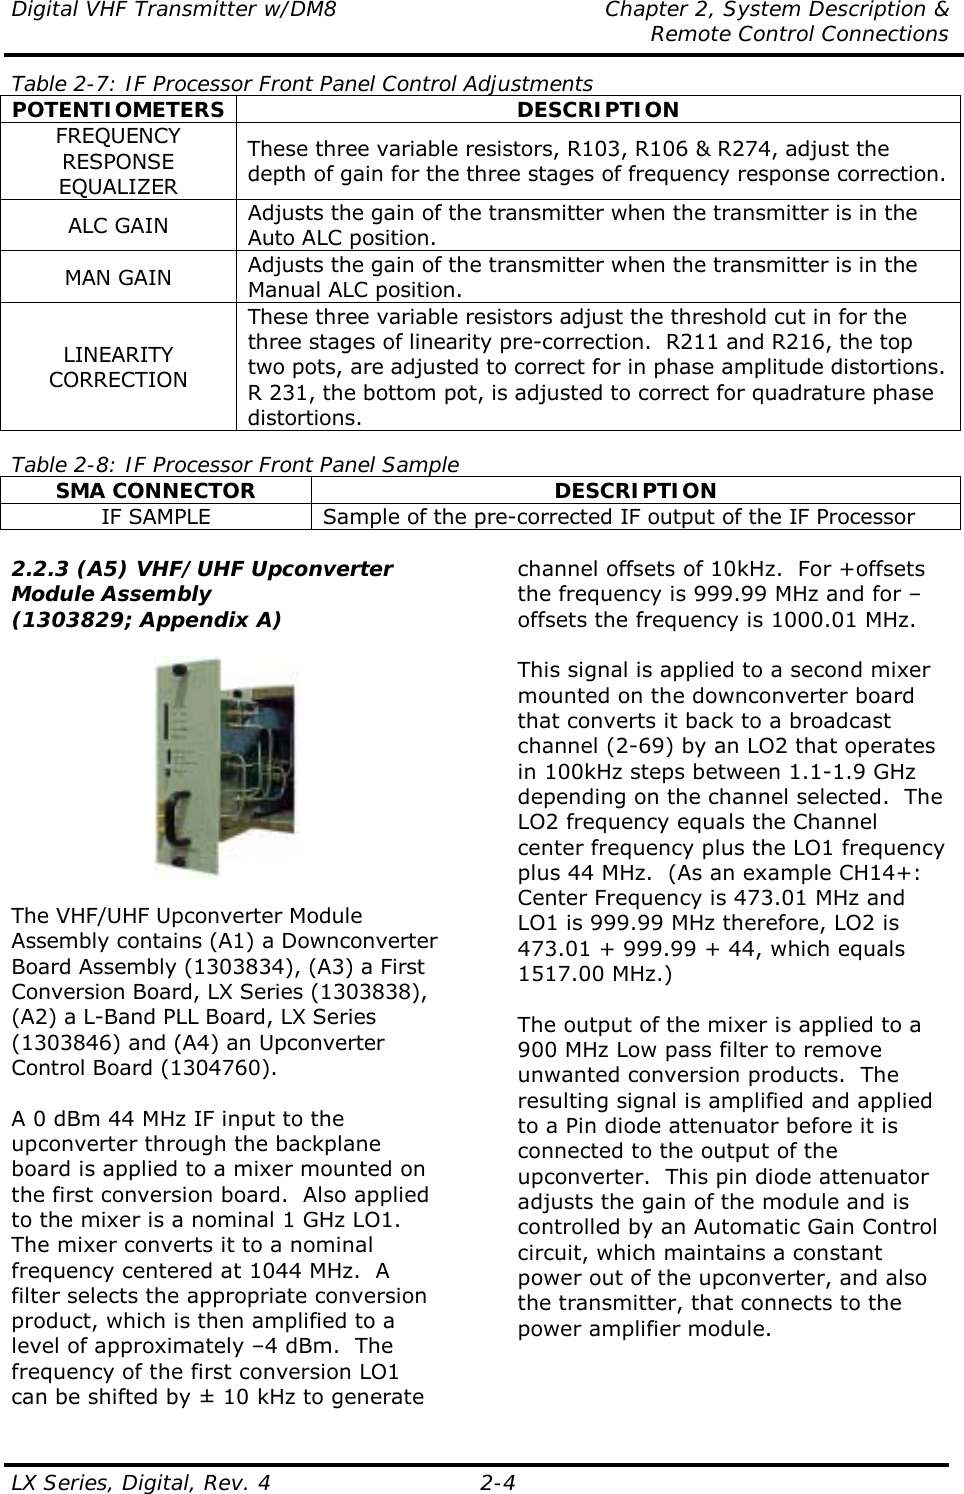 Digital VHF Transmitter w/DM8  Chapter 2, System Description &amp;   Remote Control Connections LX Series, Digital, Rev. 4    2-4 Table 2-7: IF Processor Front Panel Control Adjustments POTENTIOMETERS DESCRIPTION FREQUENCY RESPONSE EQUALIZER These three variable resistors, R103, R106 &amp; R274, adjust the depth of gain for the three stages of frequency response correction. ALC GAIN  Adjusts the gain of the transmitter when the transmitter is in the Auto ALC position. MAN GAIN  Adjusts the gain of the transmitter when the transmitter is in the Manual ALC position. LINEARITY CORRECTION These three variable resistors adjust the threshold cut in for the three stages of linearity pre-correction.  R211 and R216, the top two pots, are adjusted to correct for in phase amplitude distortions.  R 231, the bottom pot, is adjusted to correct for quadrature phase distortions.  Table 2-8: IF Processor Front Panel Sample SMA CONNECTOR  DESCRIPTION IF SAMPLE  Sample of the pre-corrected IF output of the IF Processor  2.2.3 (A5) VHF/UHF Upconverter Module Assembly (1303829; Appendix A)    The VHF/UHF Upconverter Module Assembly contains (A1) a Downconverter Board Assembly (1303834), (A3) a First Conversion Board, LX Series (1303838), (A2) a L-Band PLL Board, LX Series (1303846) and (A4) an Upconverter Control Board (1304760).  A 0 dBm 44 MHz IF input to the upconverter through the backplane board is applied to a mixer mounted on the first conversion board.  Also applied to the mixer is a nominal 1 GHz LO1.  The mixer converts it to a nominal frequency centered at 1044 MHz.  A filter selects the appropriate conversion product, which is then amplified to a level of approximately –4 dBm.  The frequency of the first conversion LO1 can be shifted by ± 10 kHz to generate channel offsets of 10kHz.  For +offsets the frequency is 999.99 MHz and for –offsets the frequency is 1000.01 MHz.  This signal is applied to a second mixer mounted on the downconverter board that converts it back to a broadcast channel (2-69) by an LO2 that operates in 100kHz steps between 1.1-1.9 GHz depending on the channel selected.  The LO2 frequency equals the Channel center frequency plus the LO1 frequency plus 44 MHz.  (As an example CH14+: Center Frequency is 473.01 MHz and LO1 is 999.99 MHz therefore, LO2 is 473.01 + 999.99 + 44, which equals 1517.00 MHz.)  The output of the mixer is applied to a 900 MHz Low pass filter to remove unwanted conversion products.  The resulting signal is amplified and applied to a Pin diode attenuator before it is connected to the output of the upconverter.  This pin diode attenuator adjusts the gain of the module and is controlled by an Automatic Gain Control circuit, which maintains a constant power out of the upconverter, and also the transmitter, that connects to the power amplifier module.   